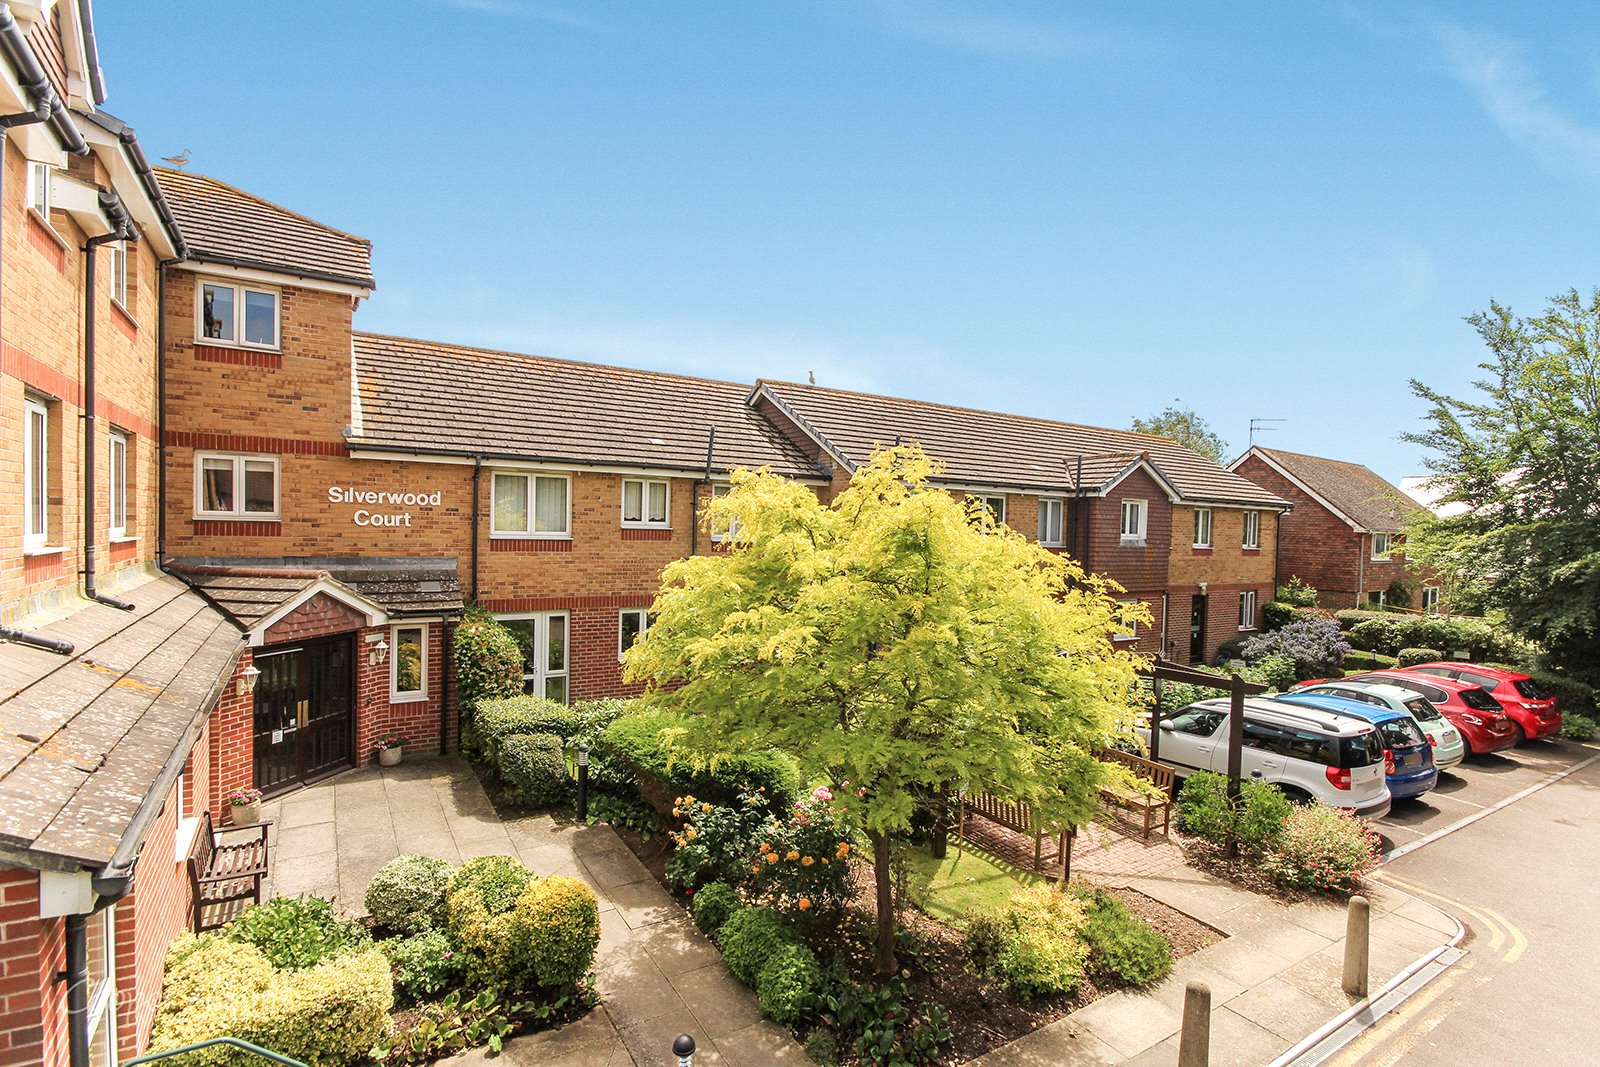 1 bed apartment for sale in Silverwood Court, Wakehurst Place, Rustington - Property Image 1